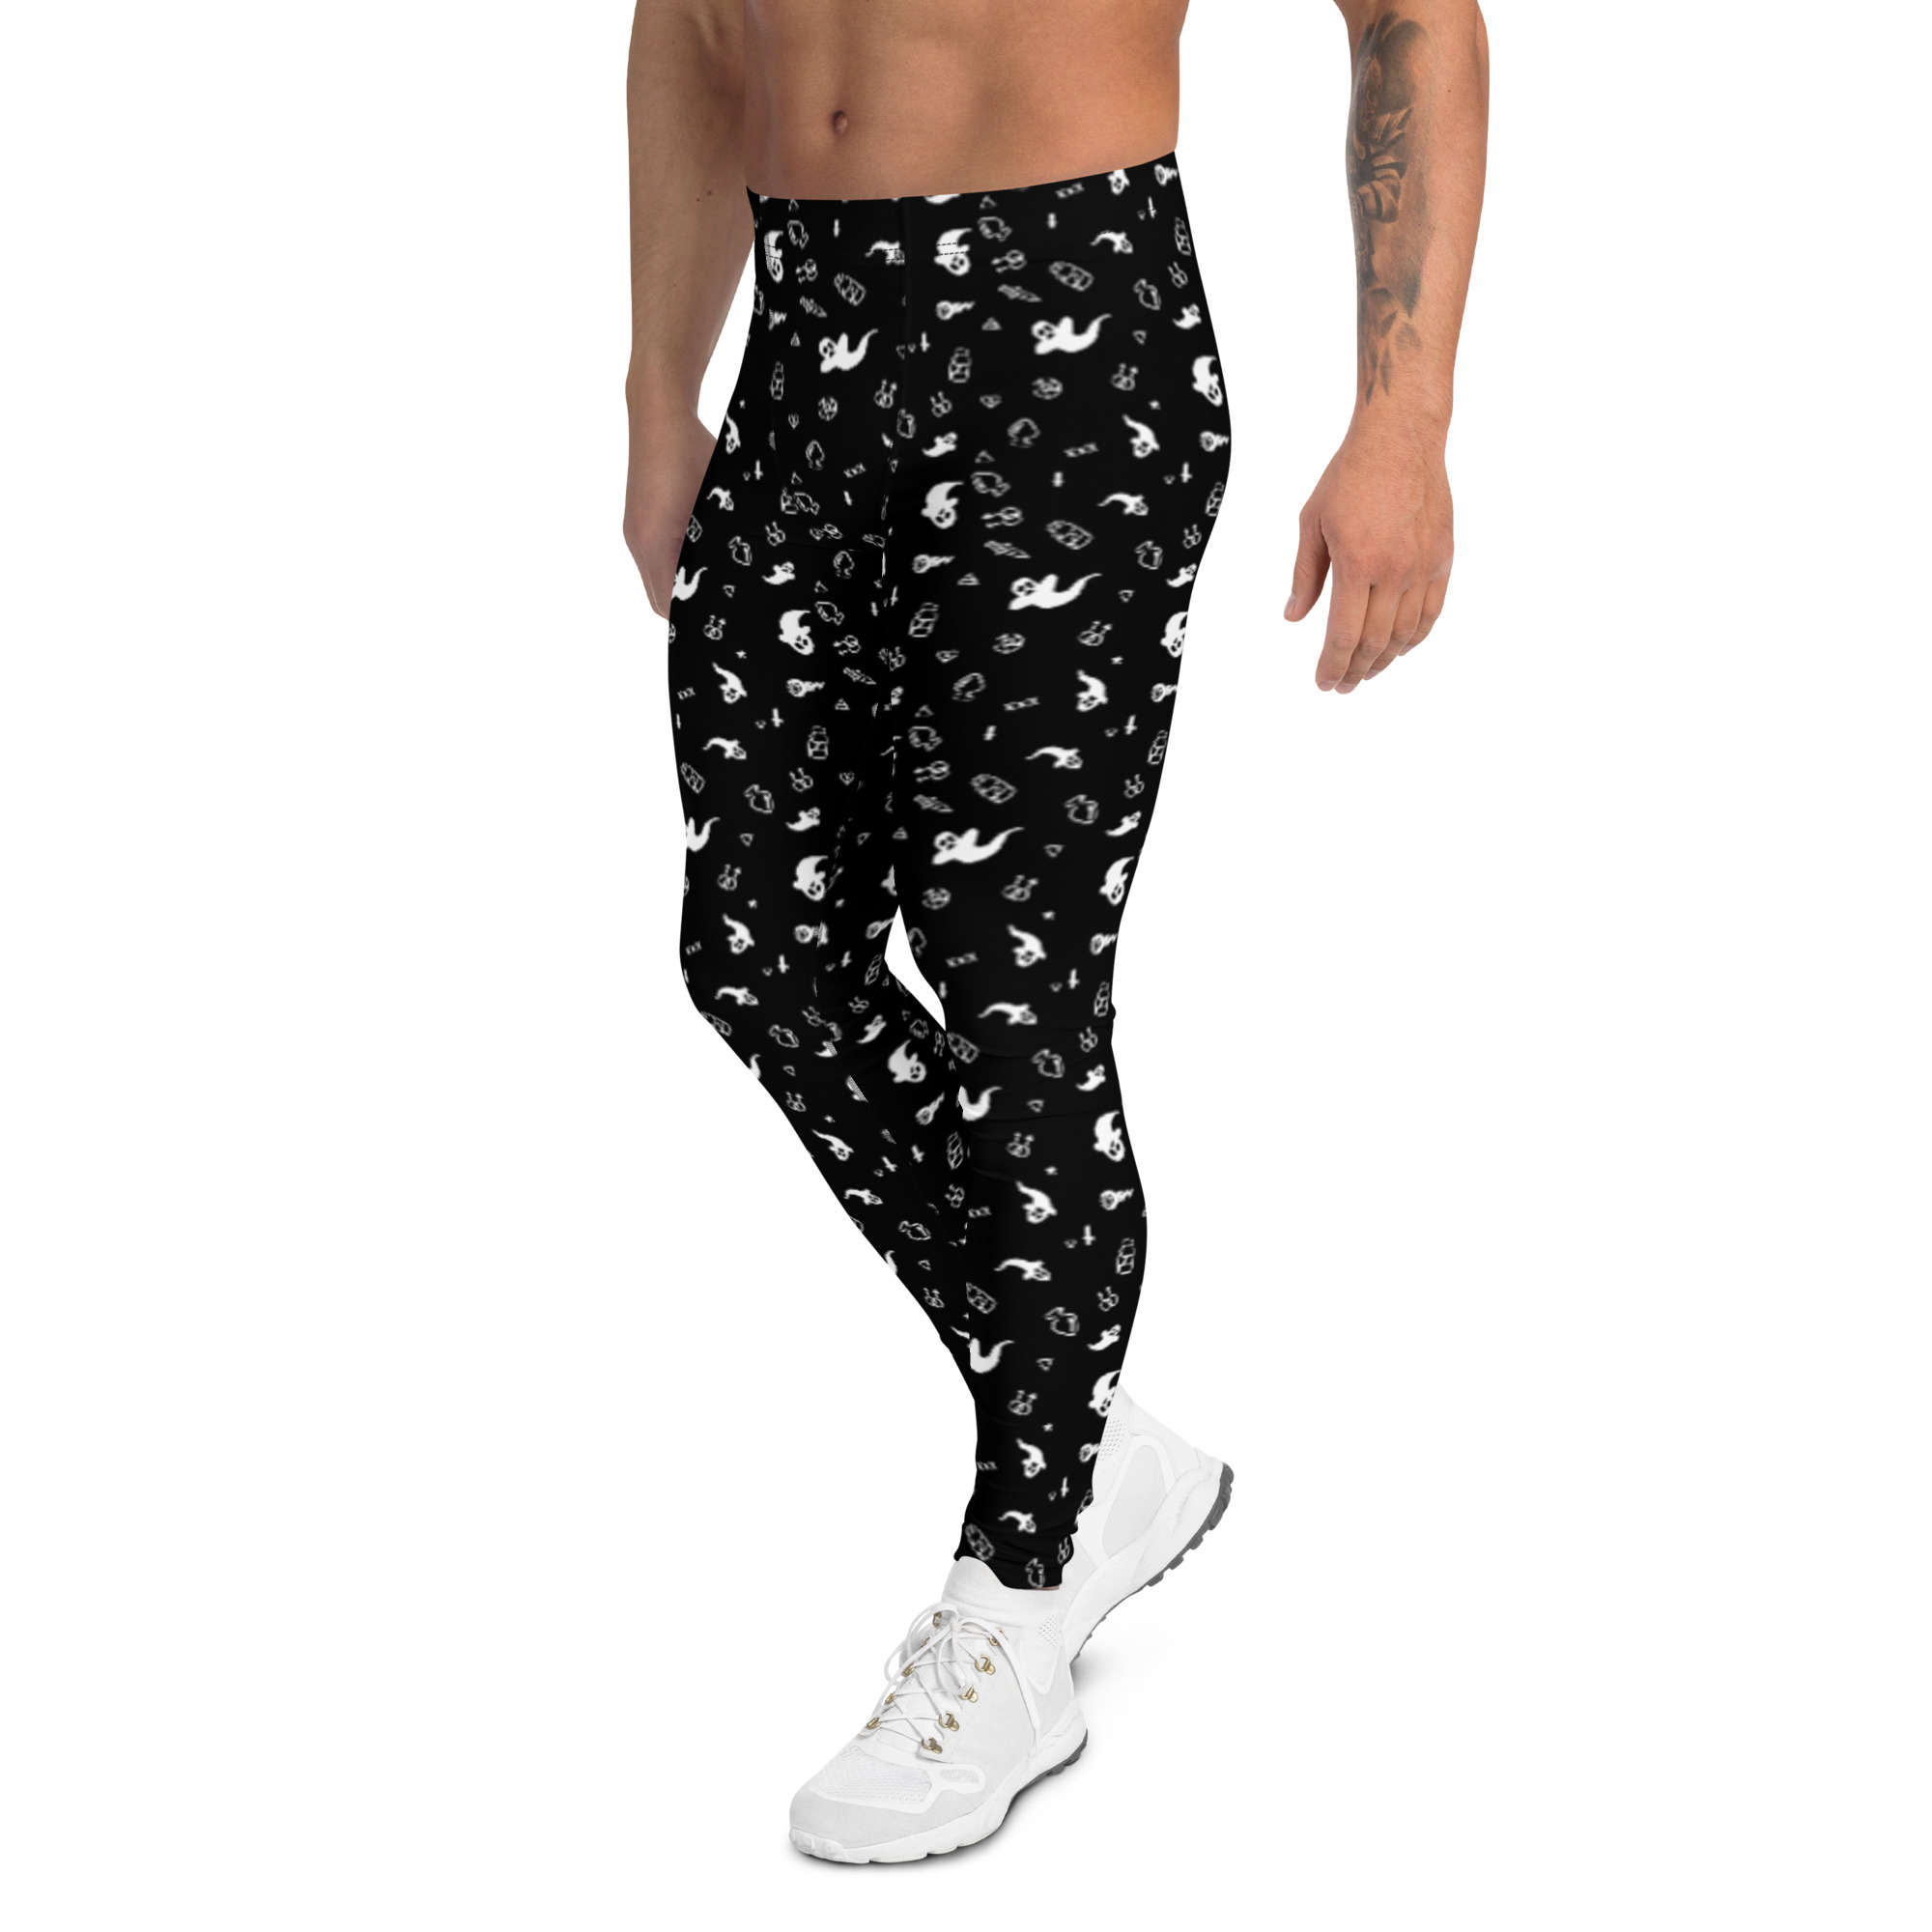 Featured image for “Spooky Queer poppers & plugs -  Men's Leggings”